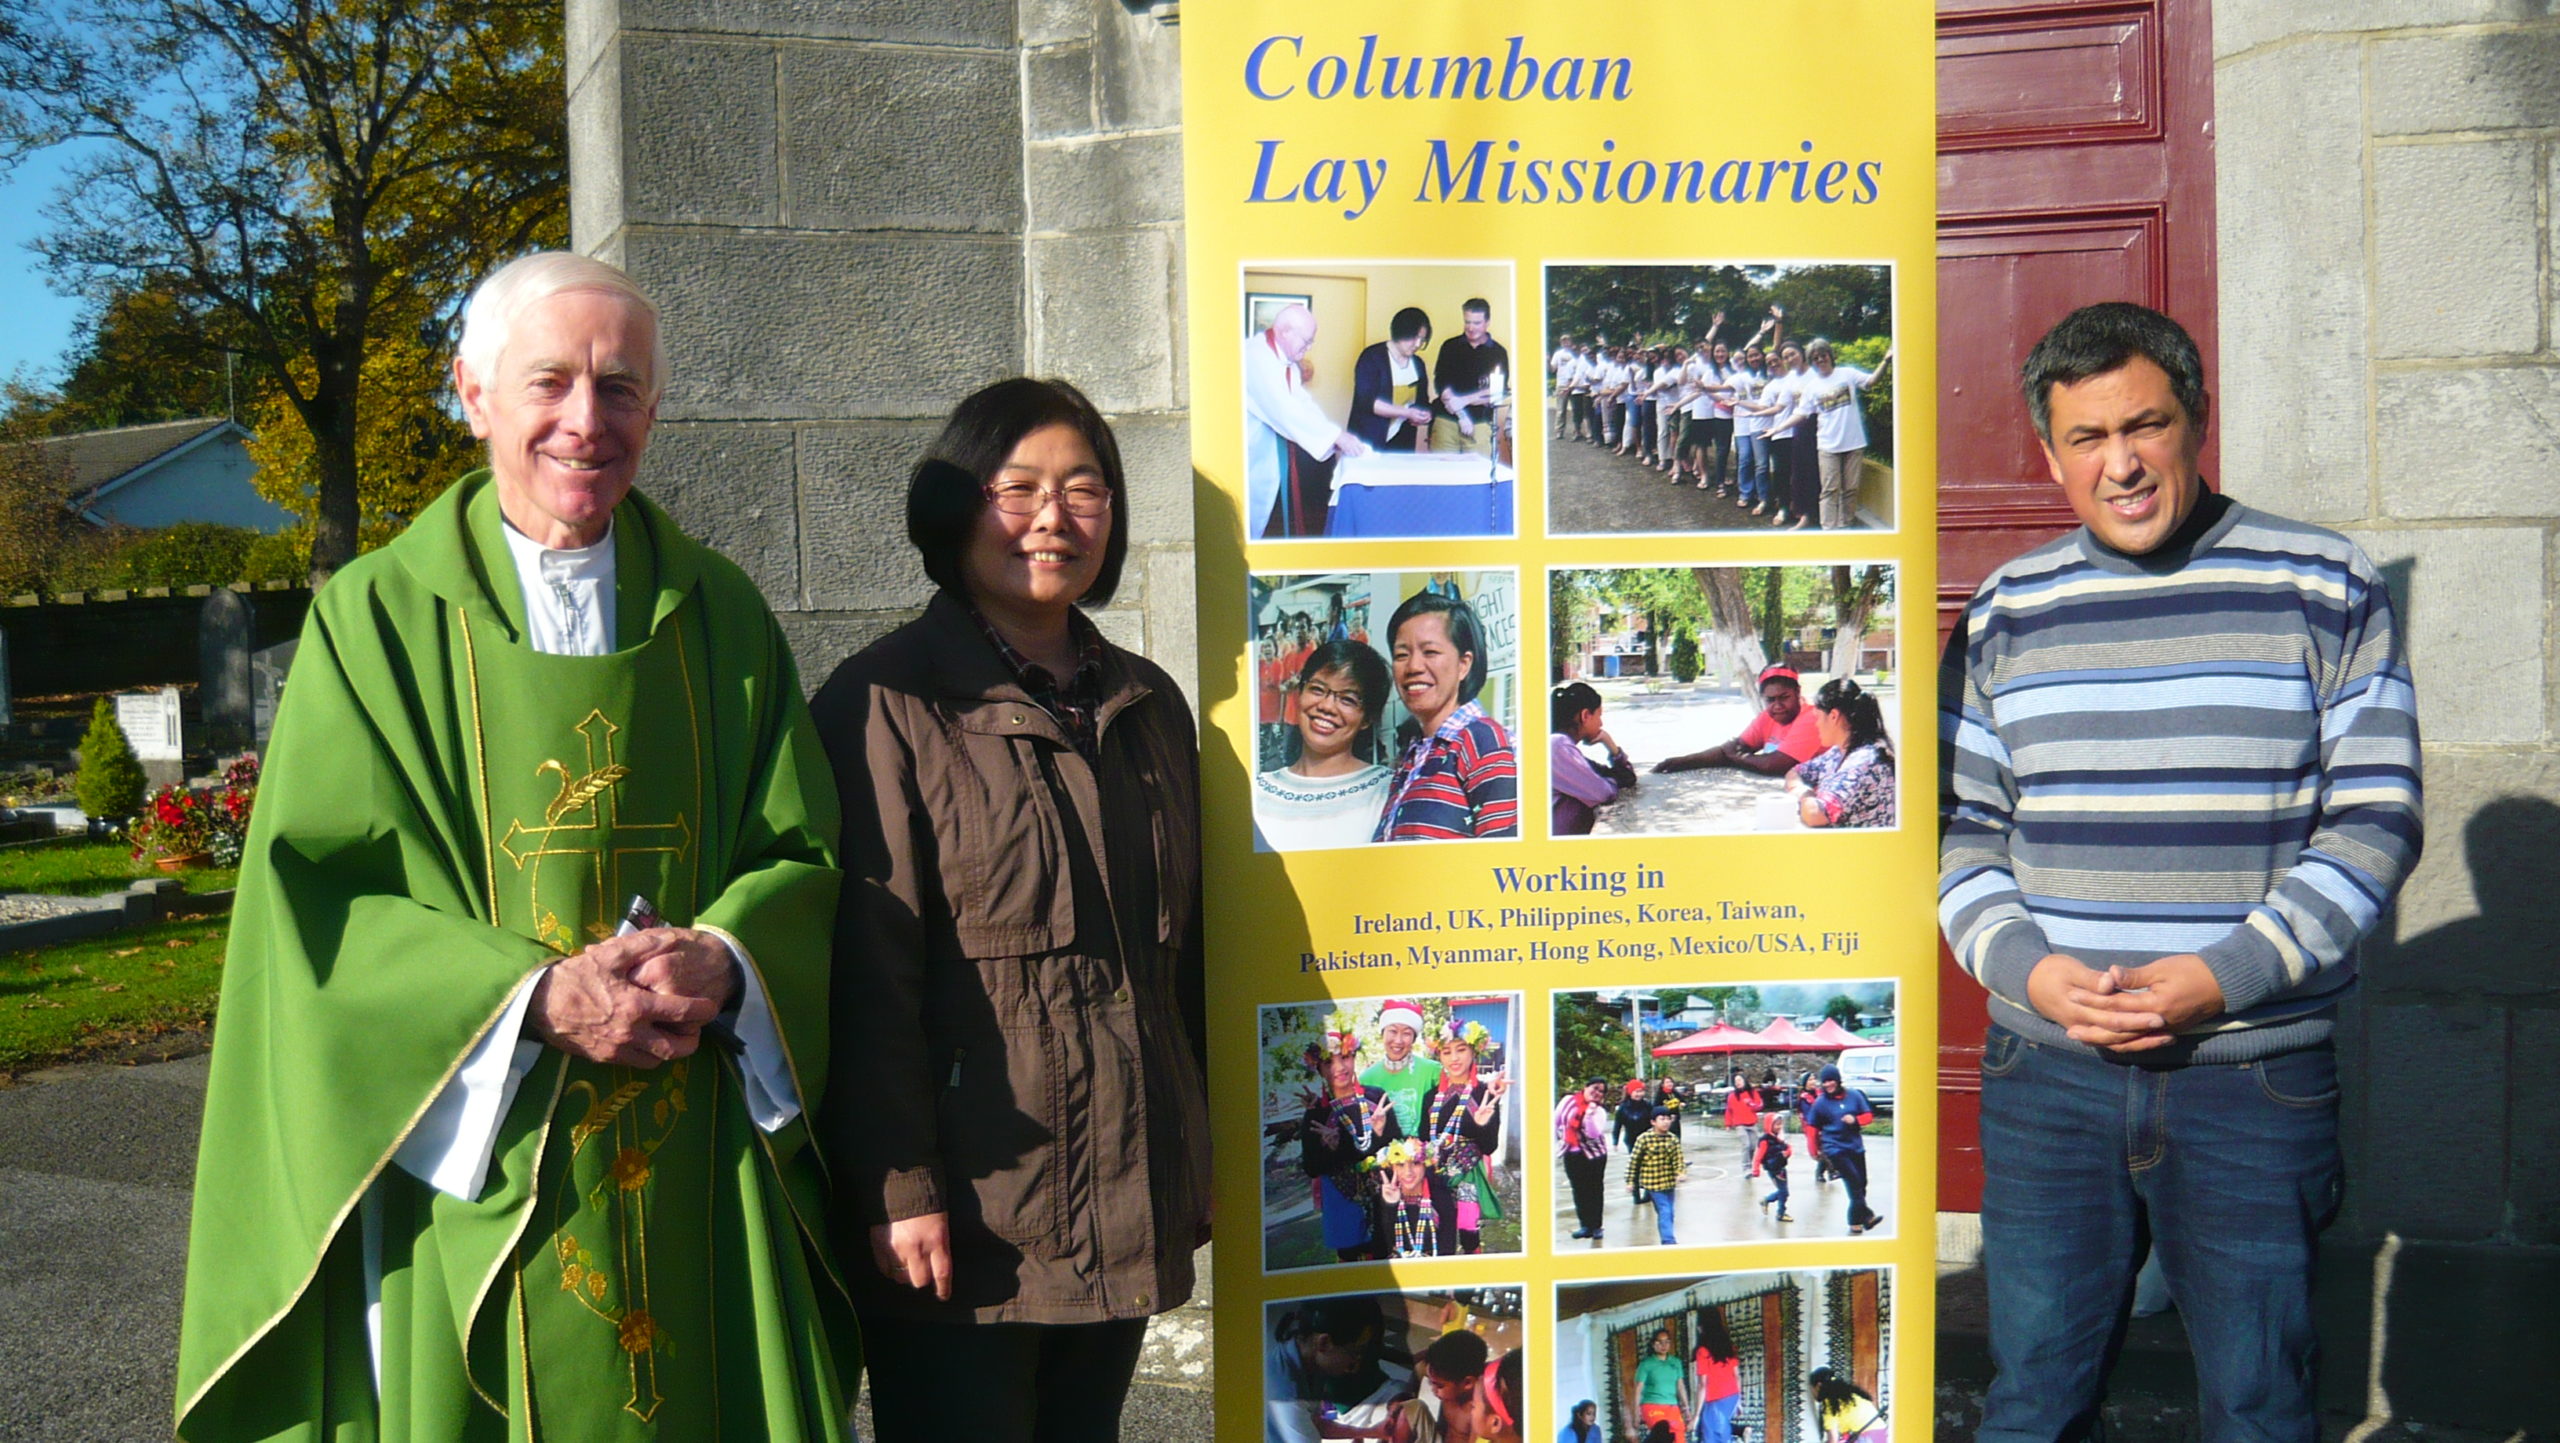 Kyungja Lee, is a Columban Lay Missionary from Korea. She gave this talk recently at Kentstown parish in Co Meath, explaining how she was inspired to find out about life as a lay missionary and join the Columban family